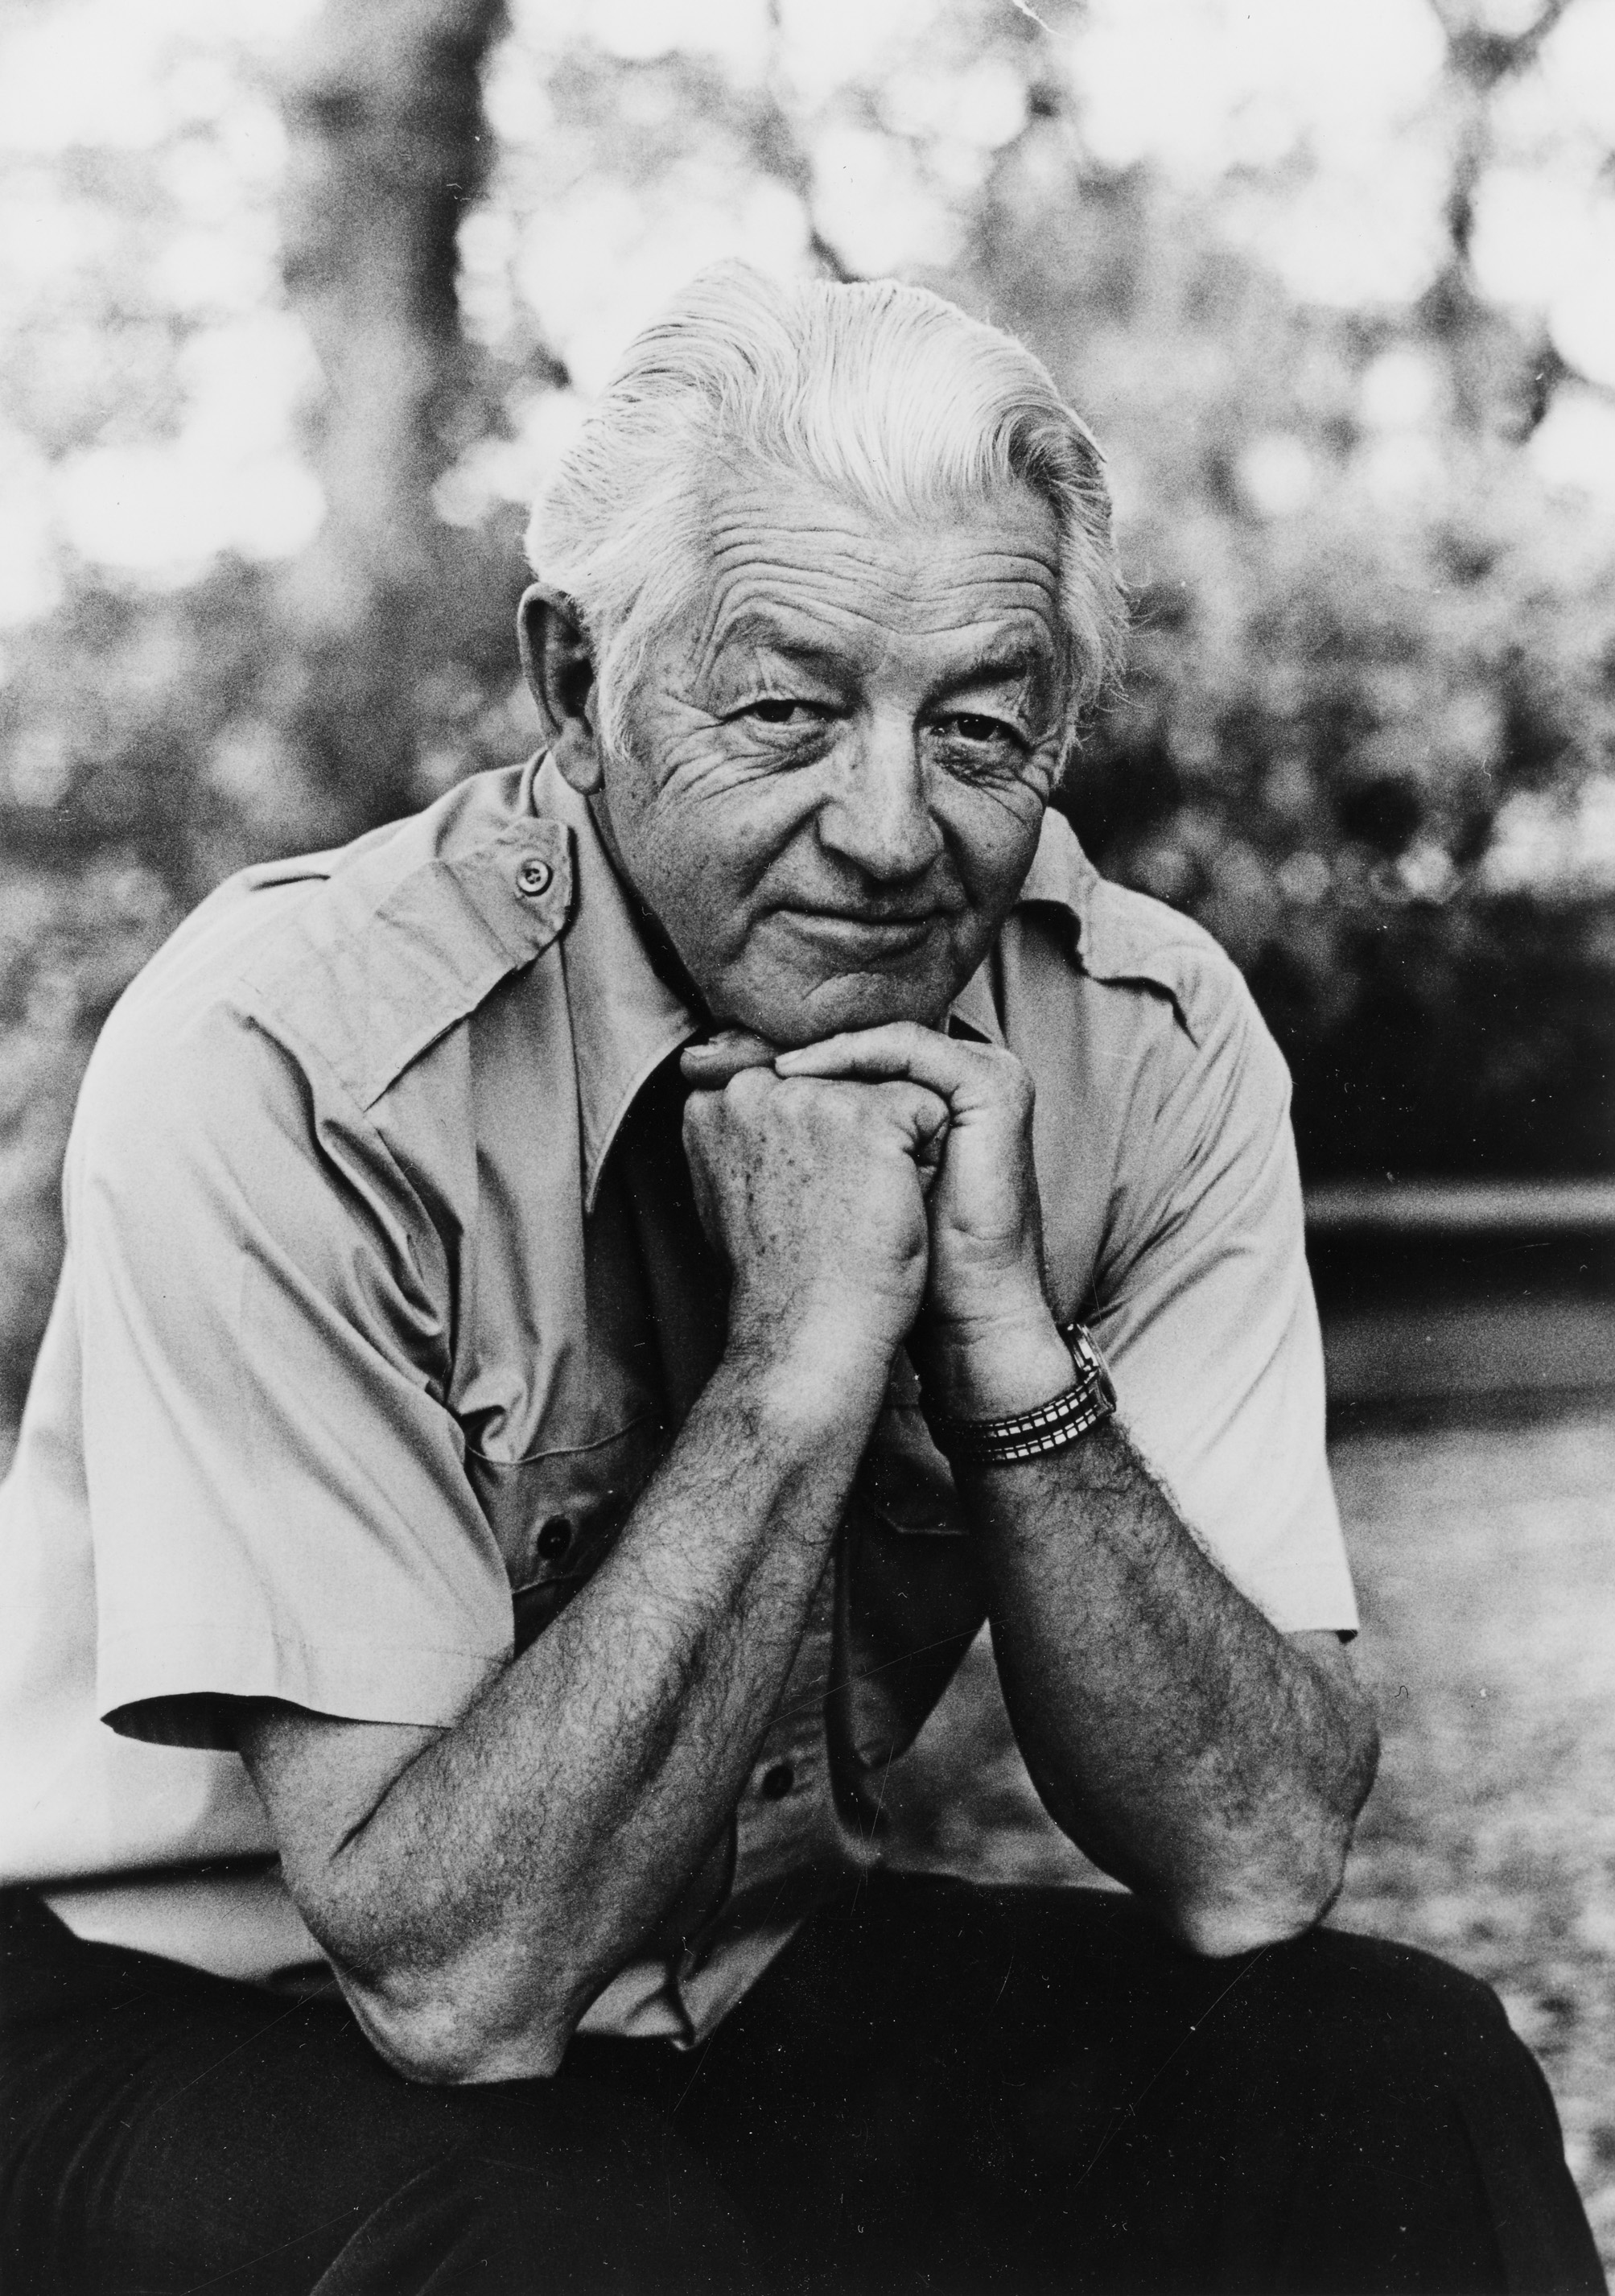 Photograph of Wallace Stegner by Margaretta K. Mitchell Photography in 1977